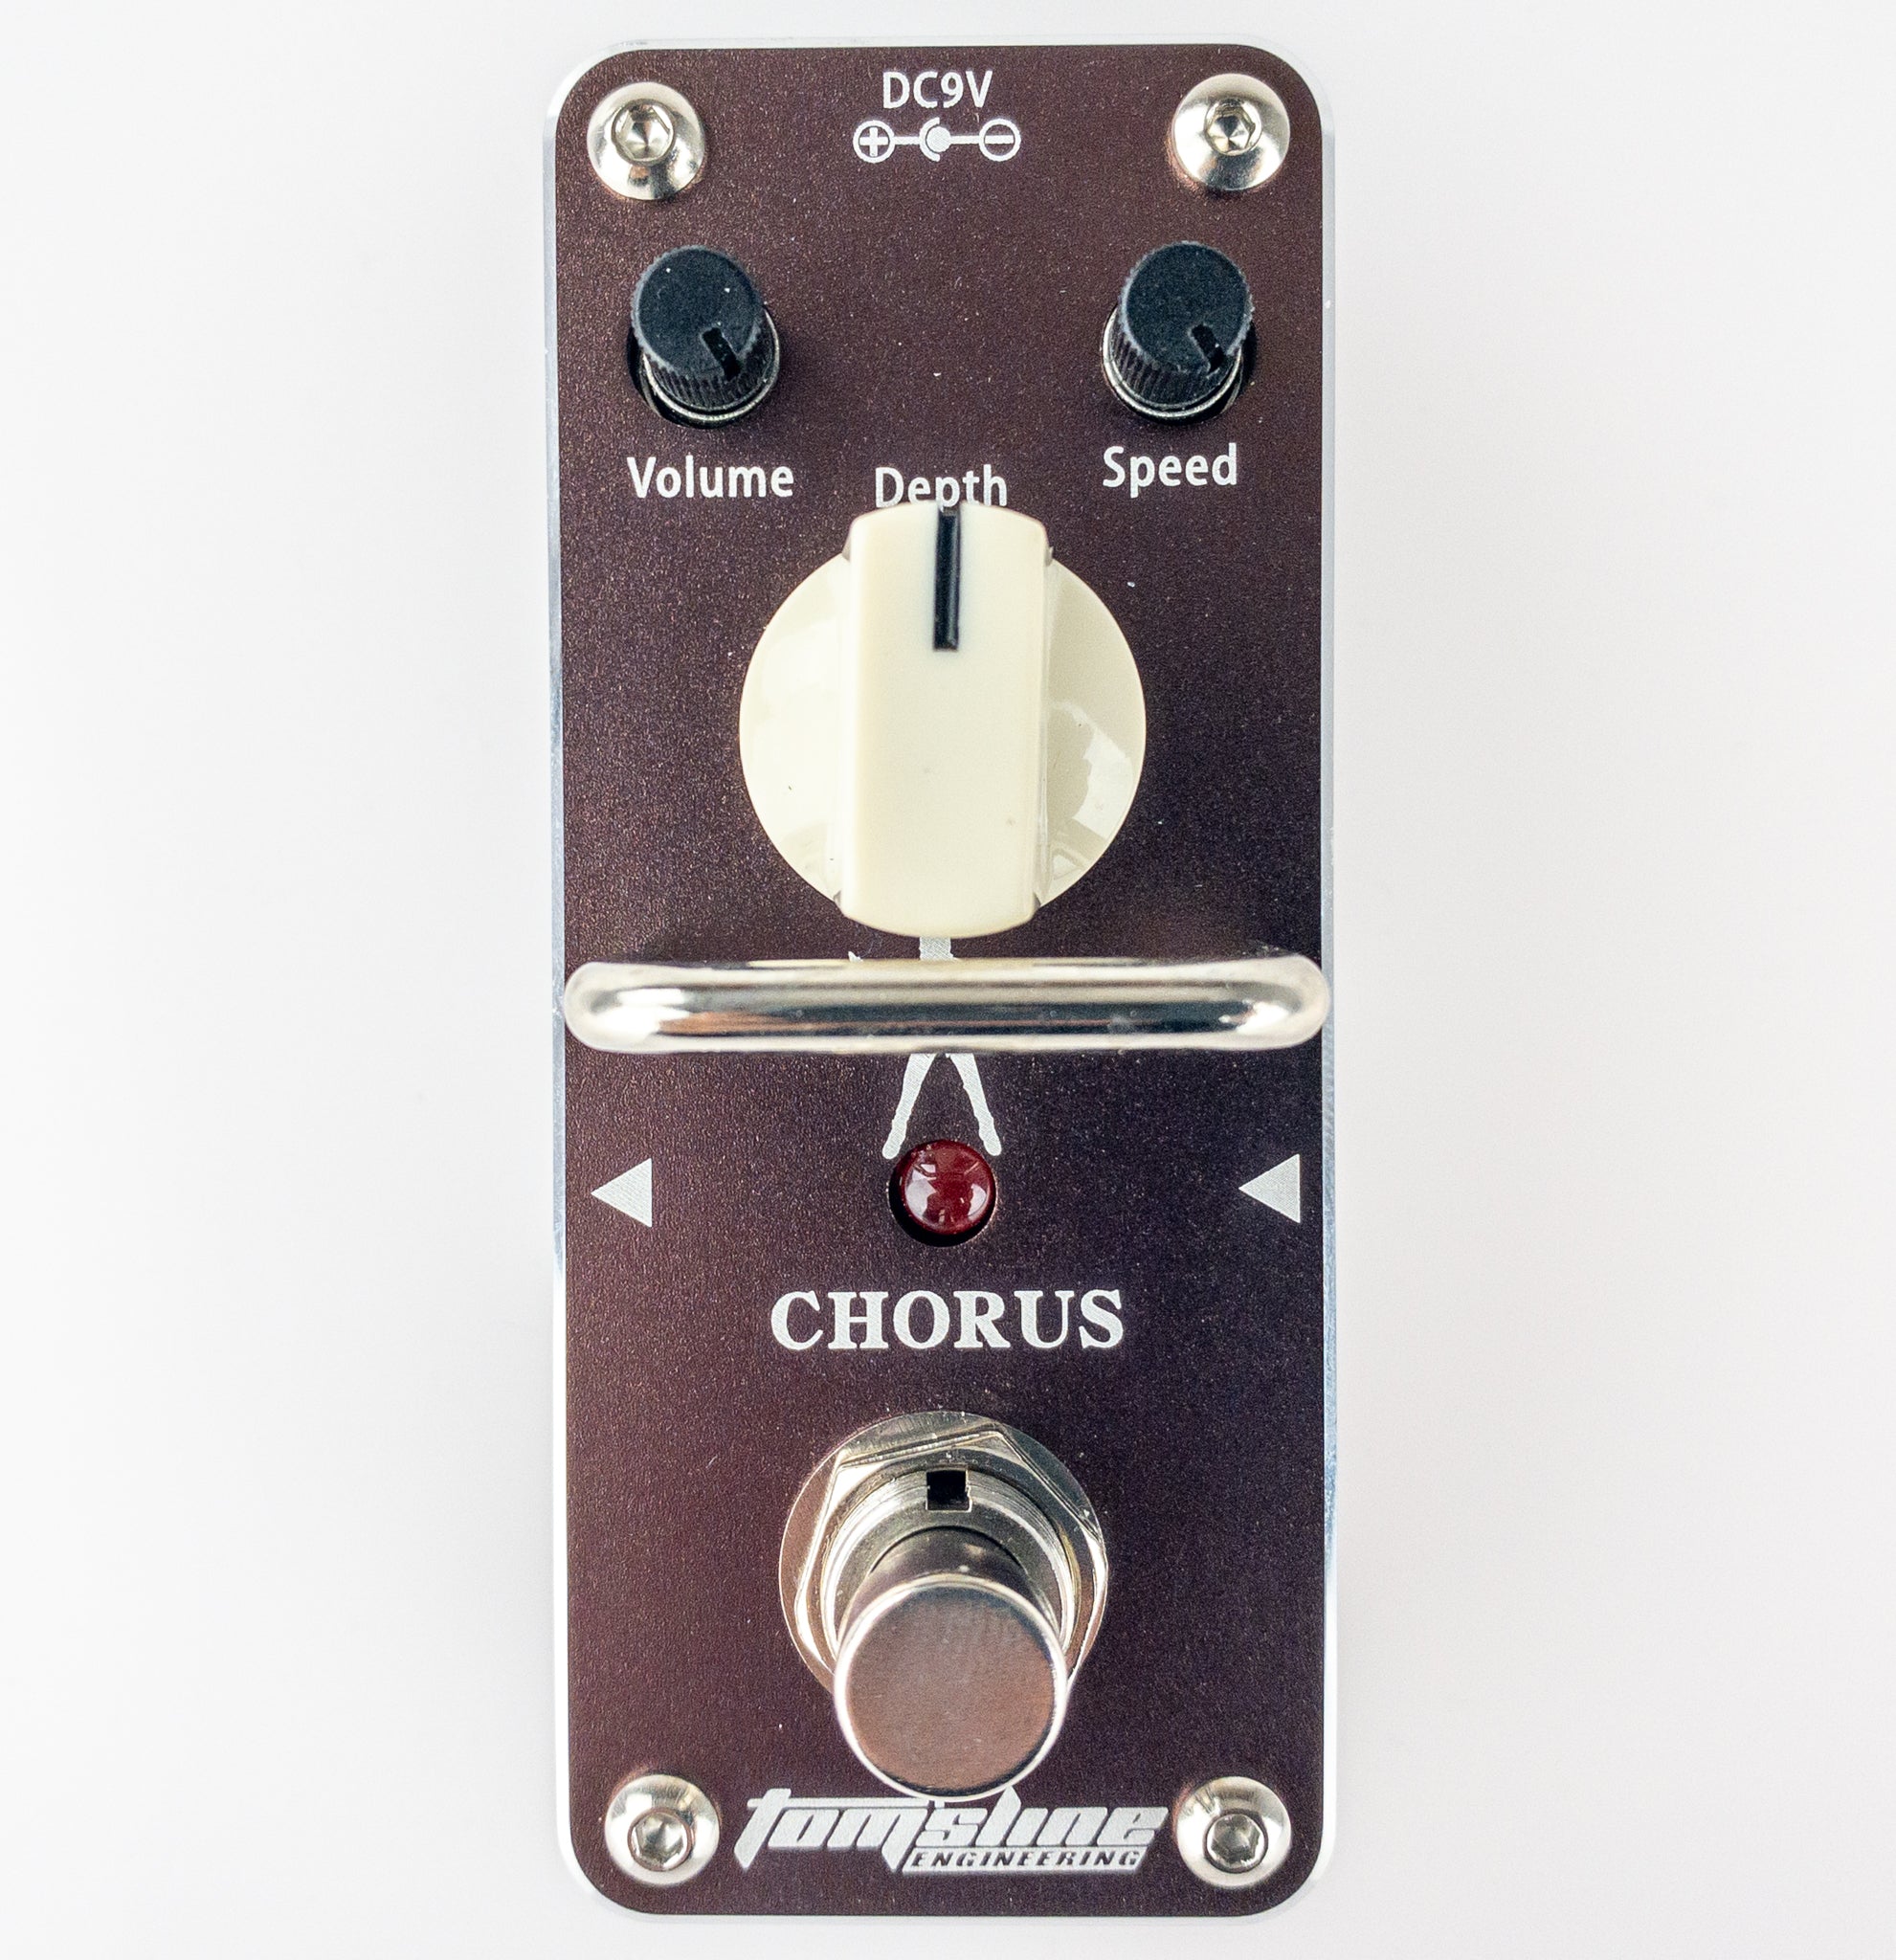 Tom'sline ACH-3S Chorus Mini Guitar Effects Pedal works with standard 9V DC PS